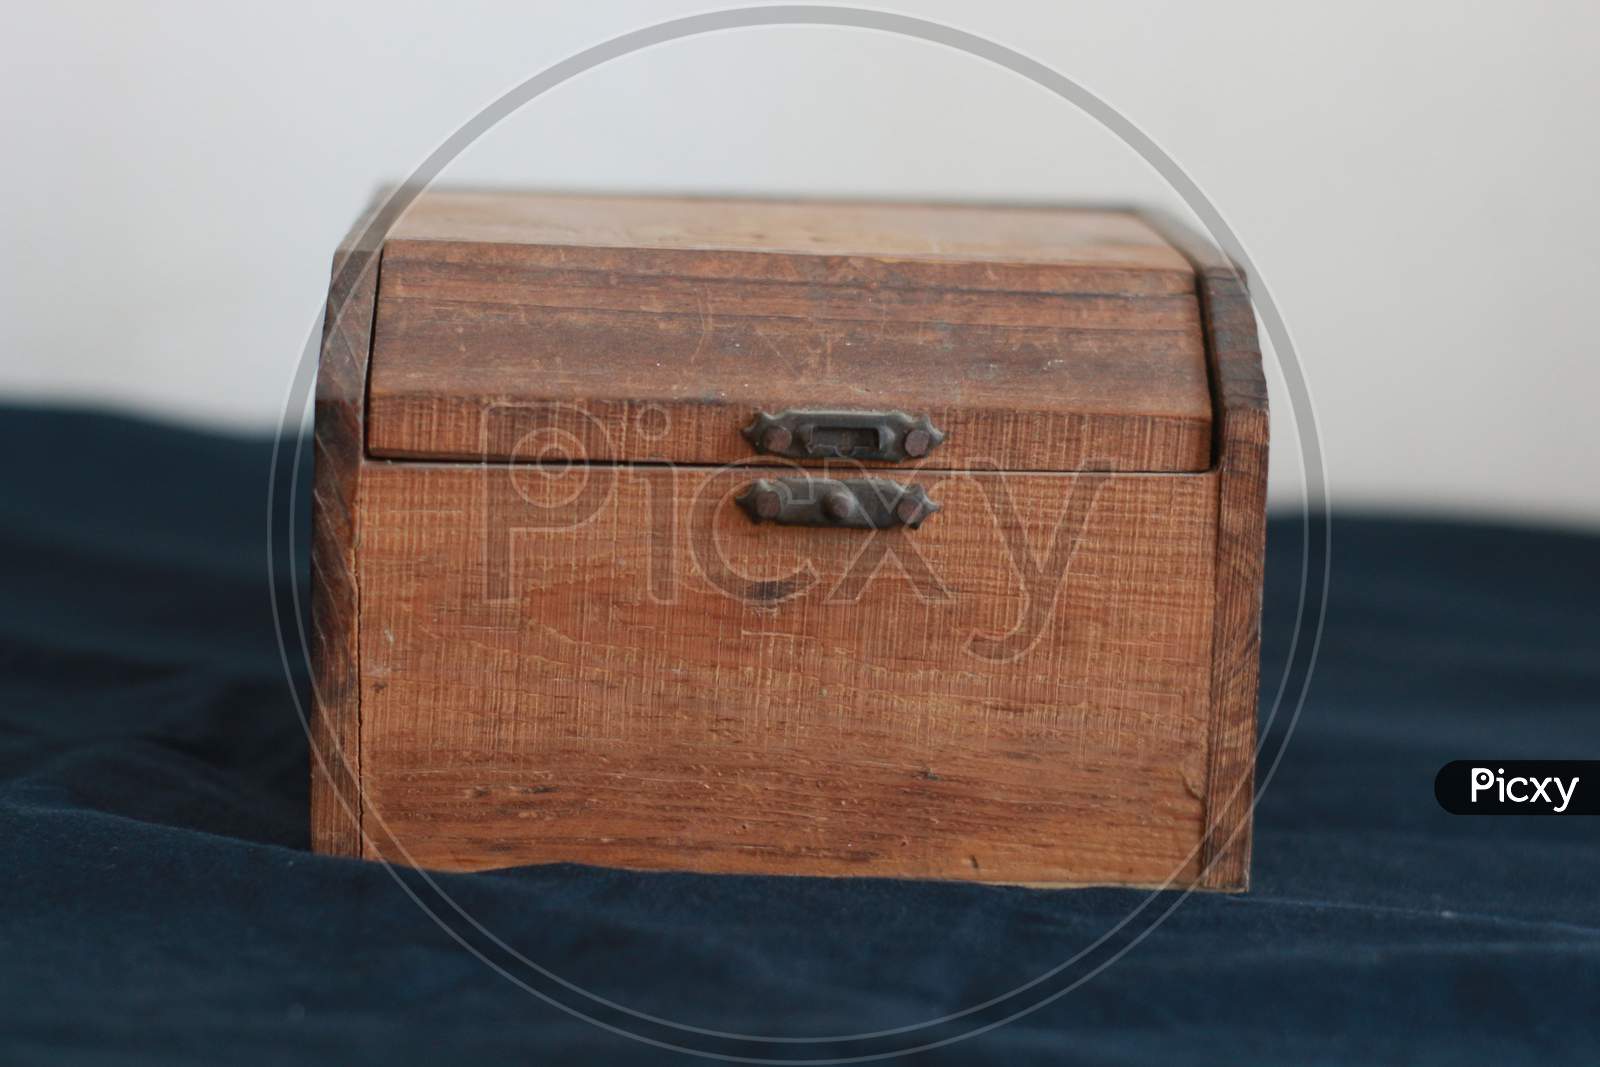 The beautiful old wooden box.